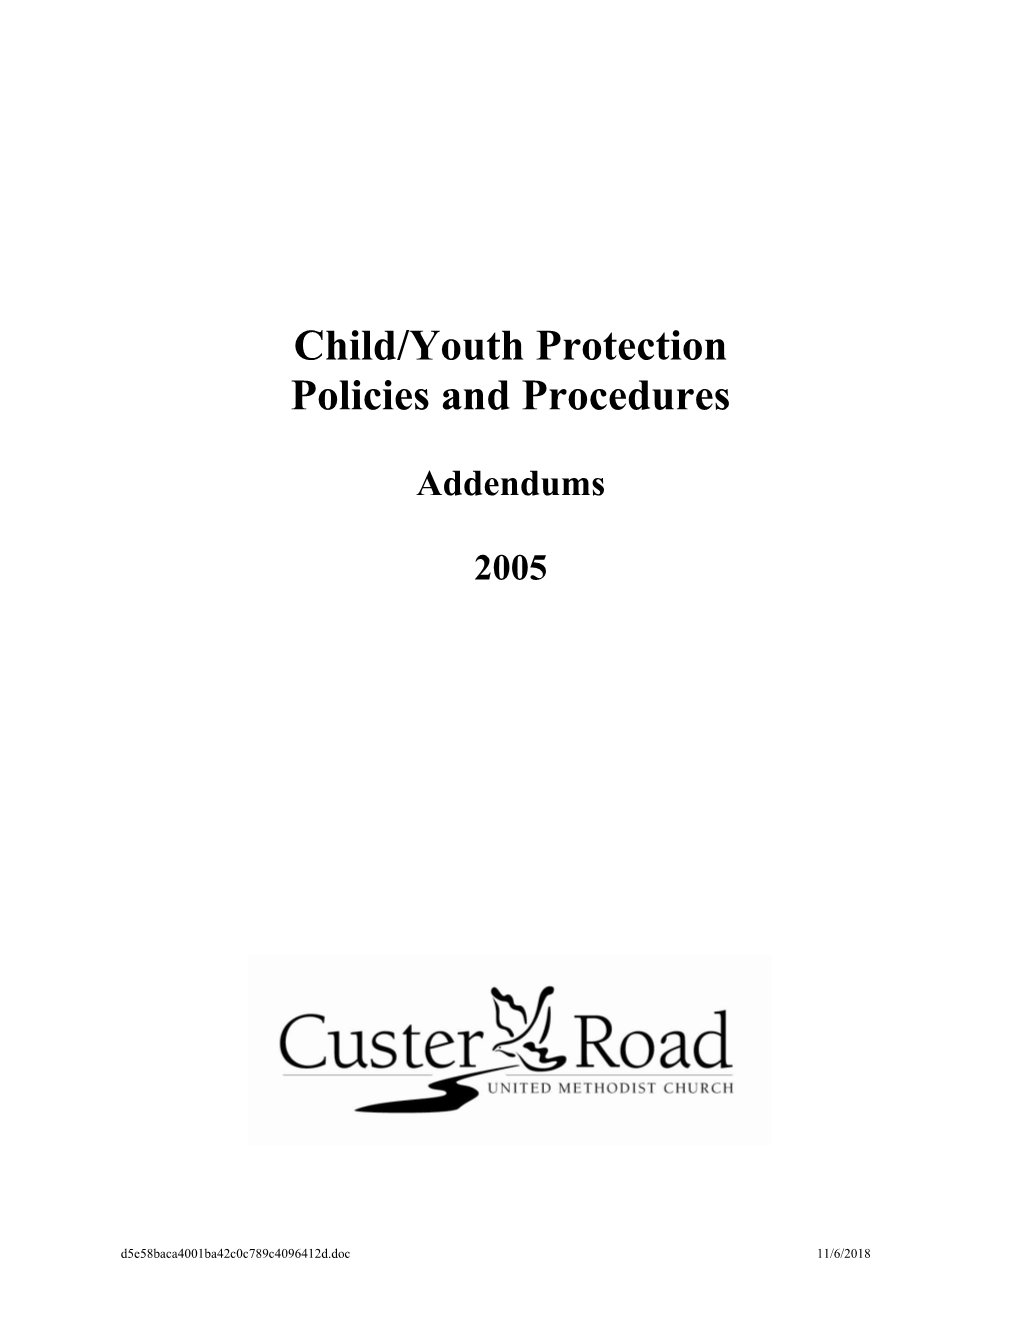 Child Safety Policies and Procedures